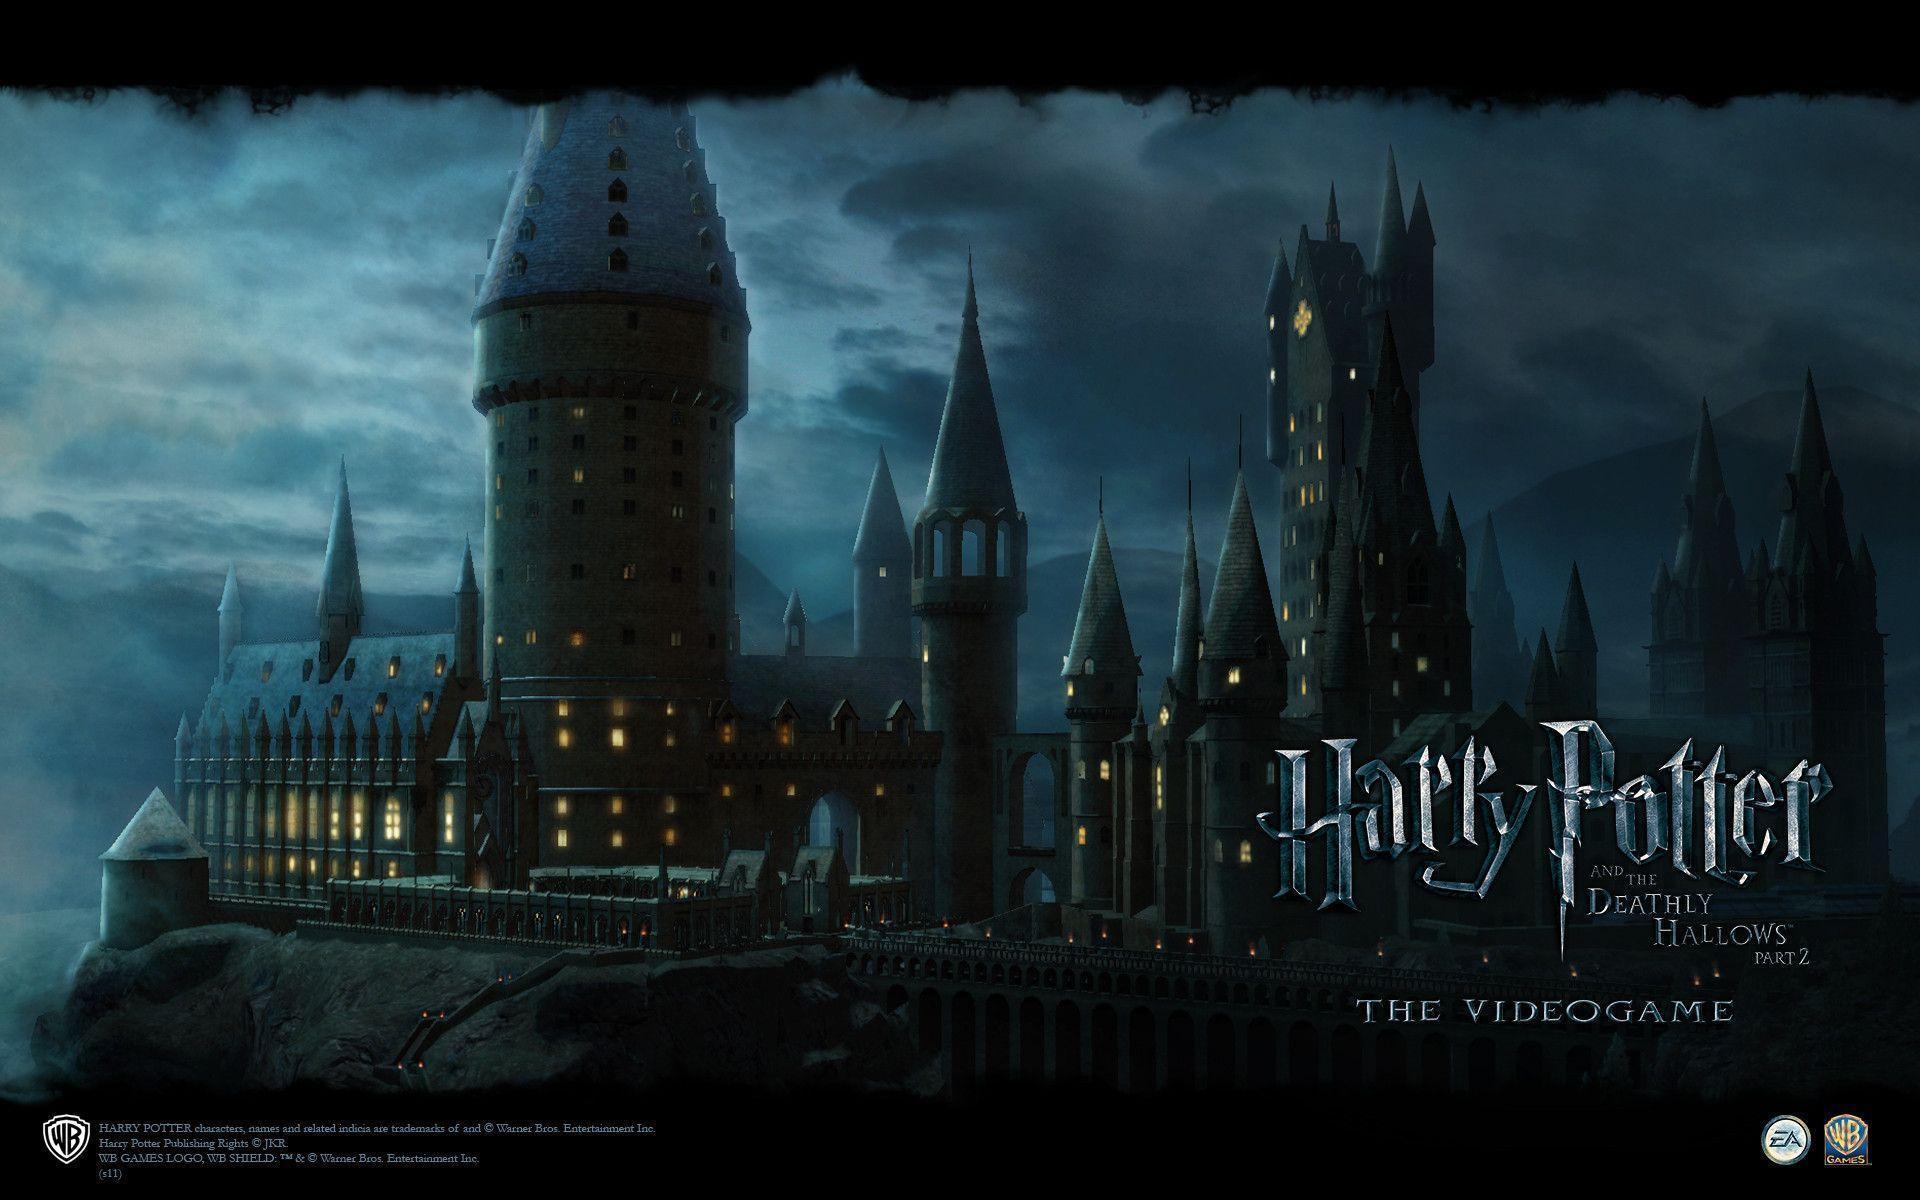 Hogwarts Wallpaper from Harry Potter and the Deathly Hallows: Part